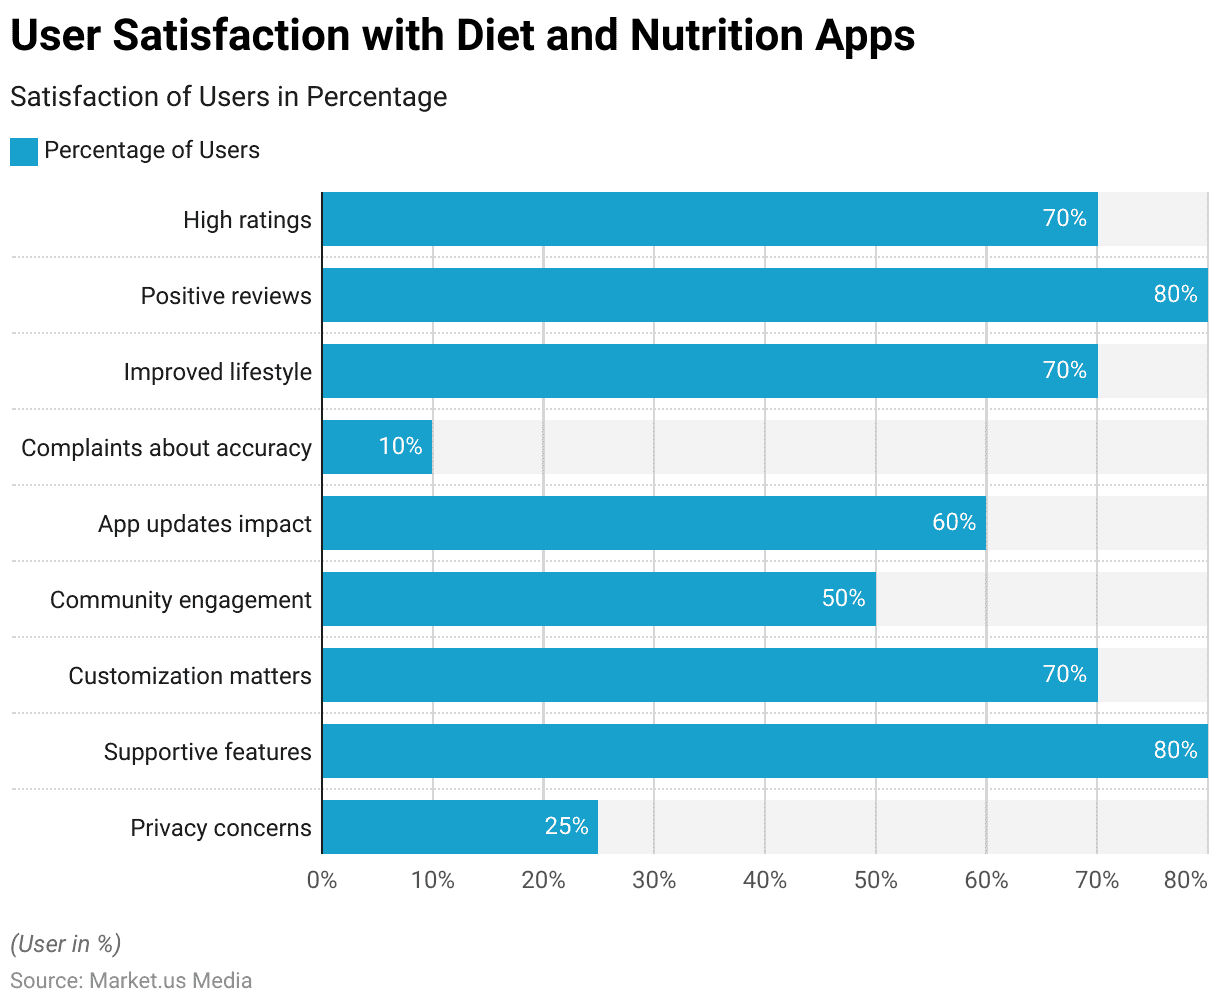 Diet and Nutrition Apps Statistics